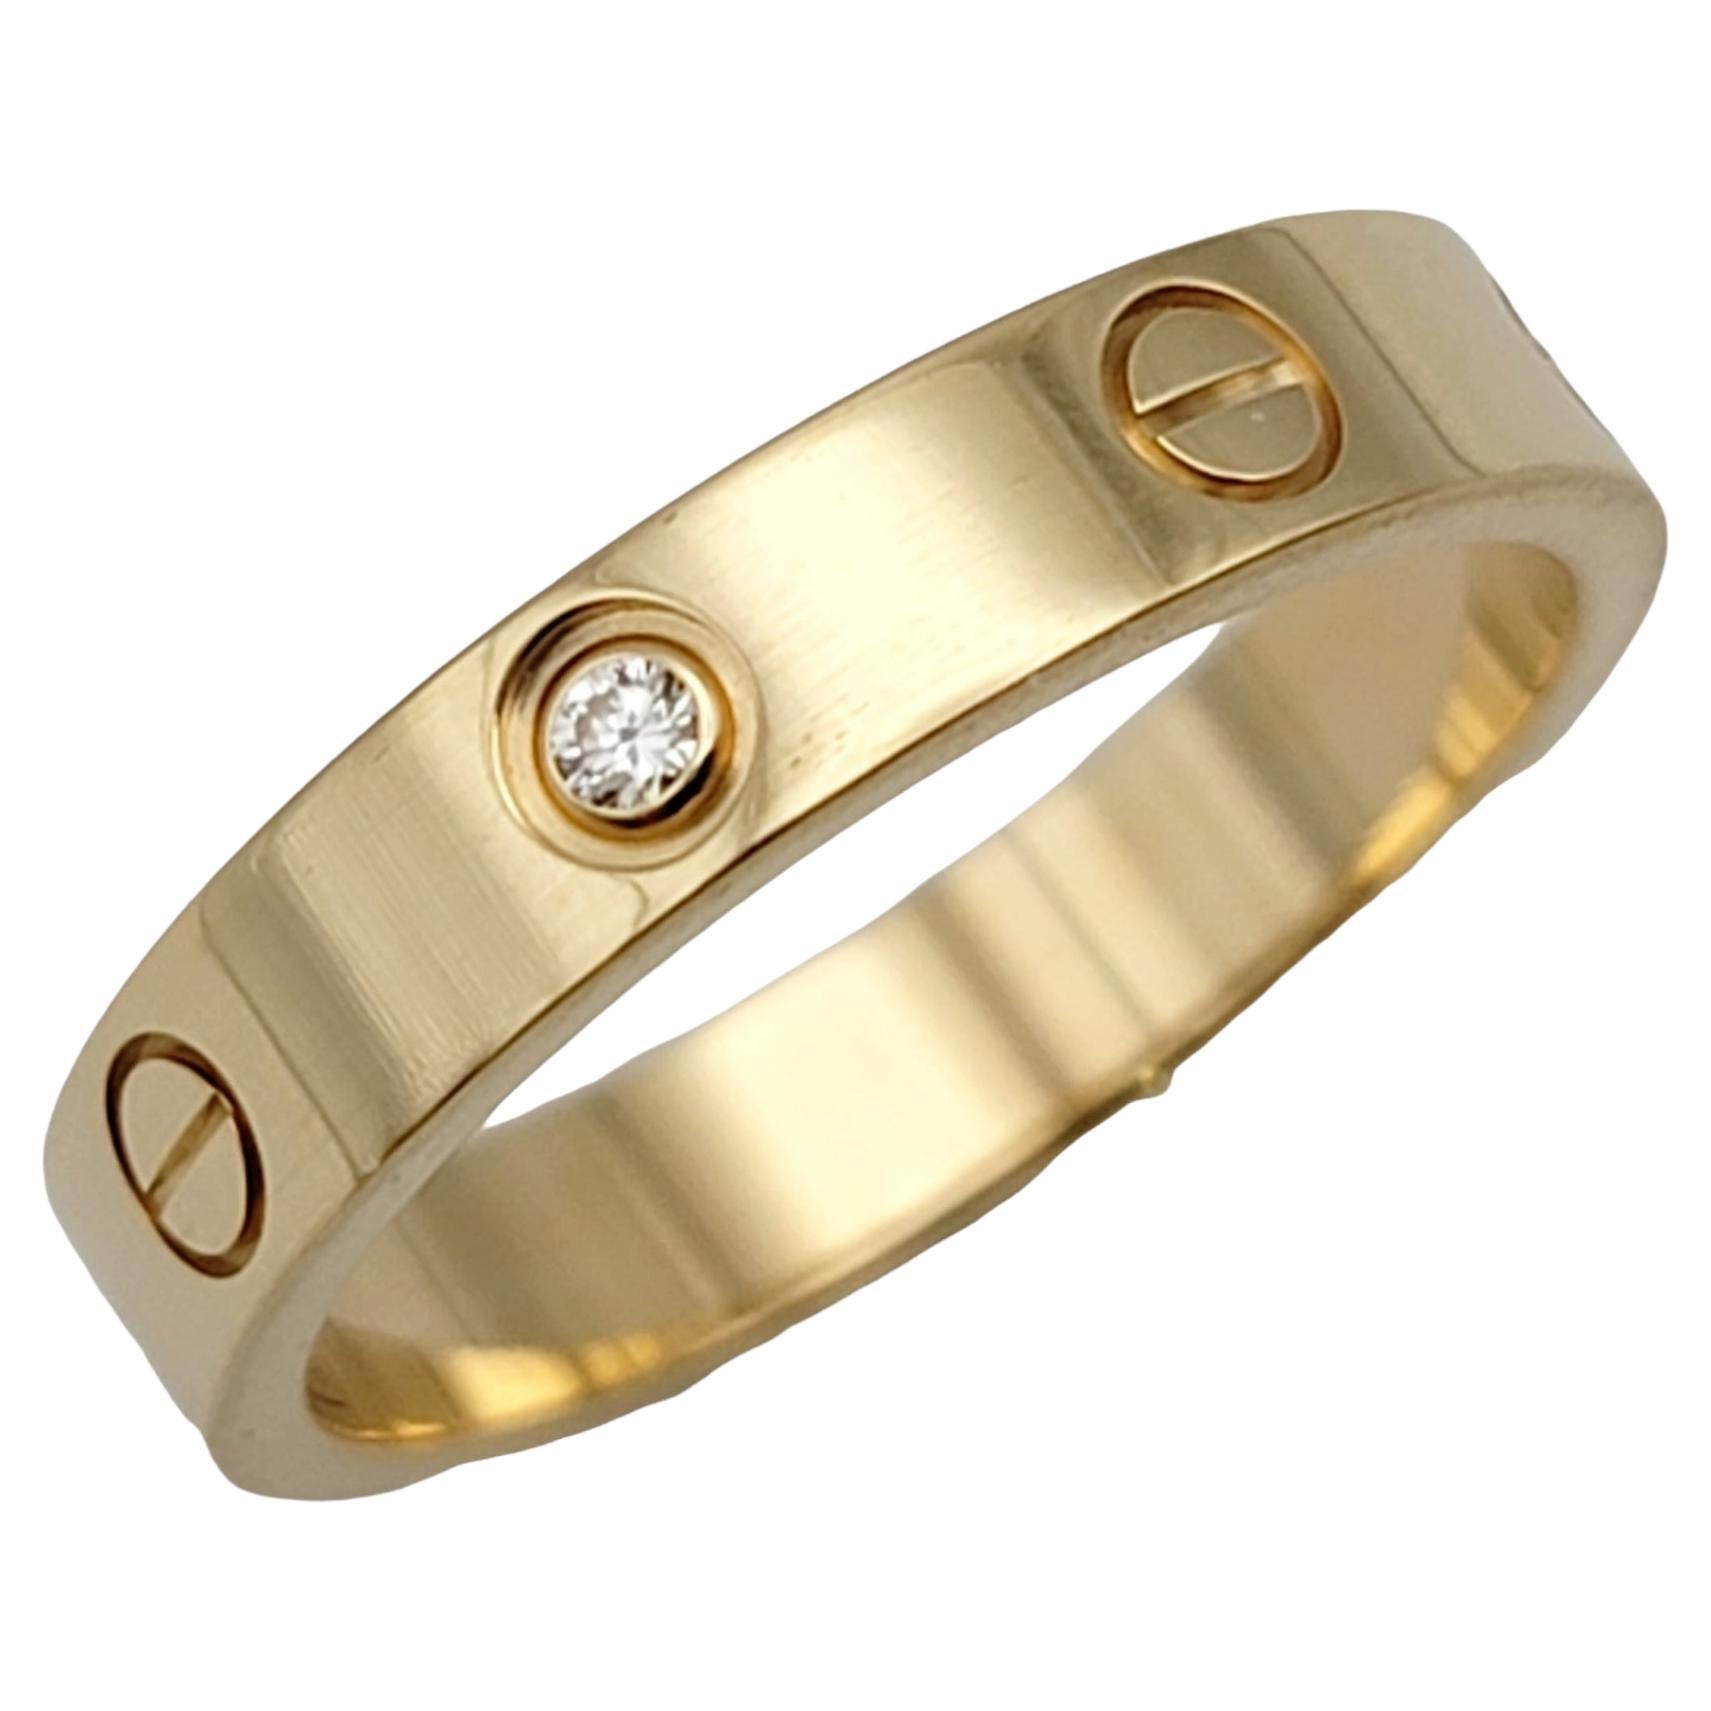 Cartier Love Collection 18 Karat Yellow Gold Wedding Band Ring with Diamond, Box